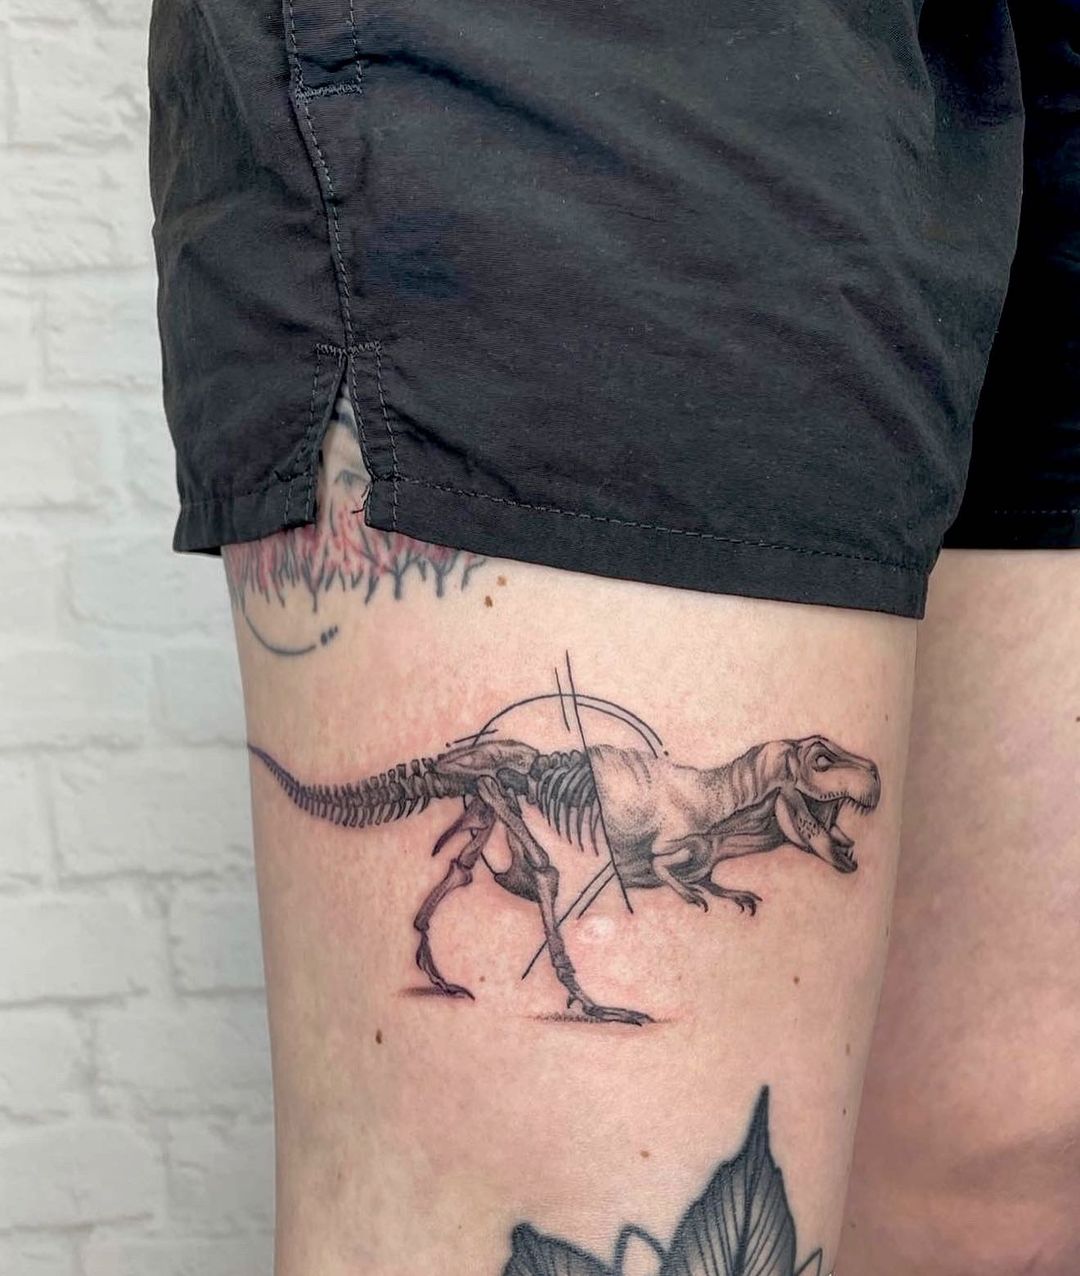 Guess Which Celebrity Got This Cute Little Dinosaur Tattoo! | HuffPost  Entertainment